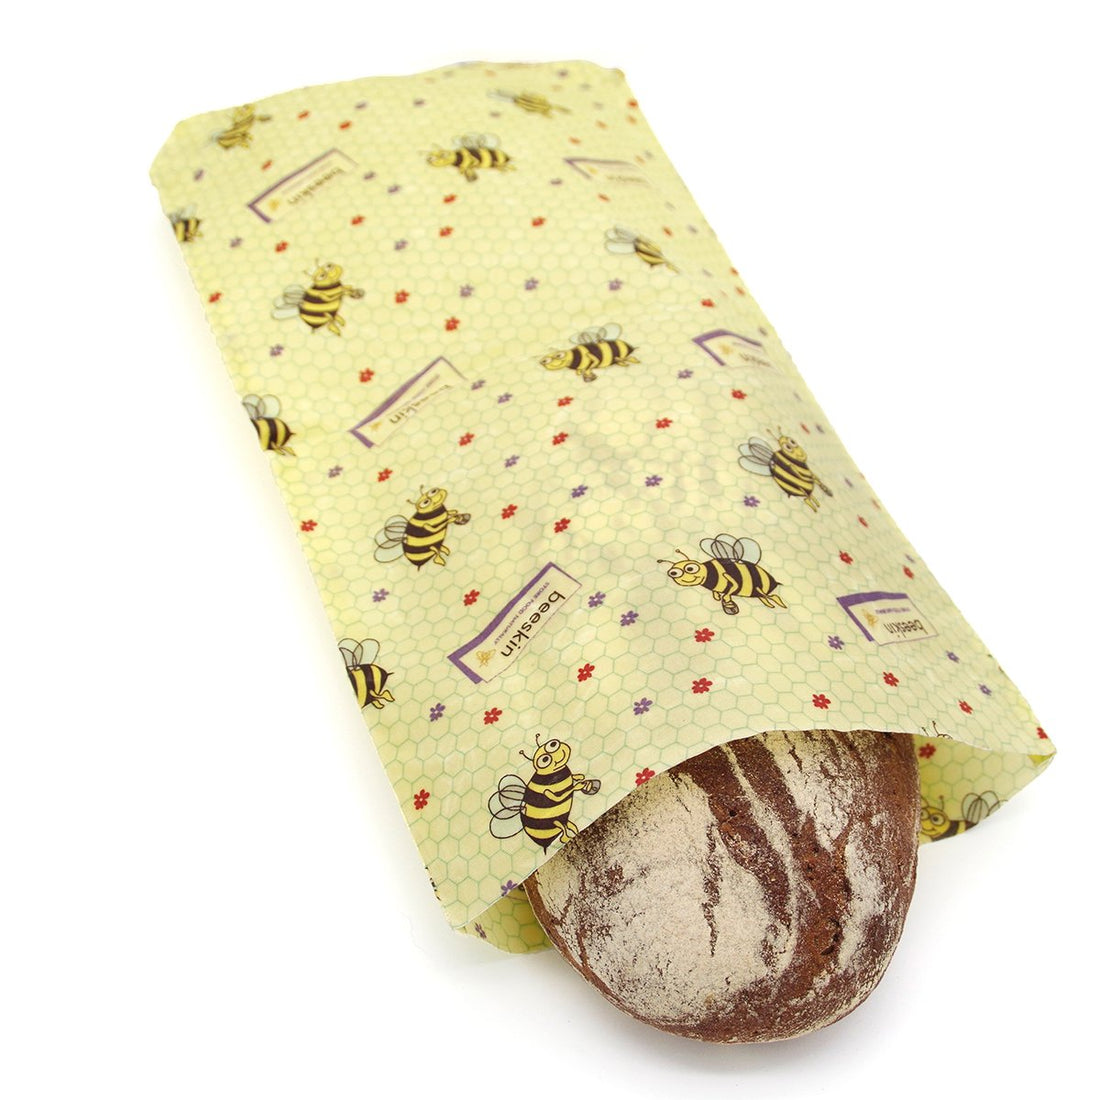 a loaf of bread is kept in a beeswax bag size l in kids design with bees and flowers